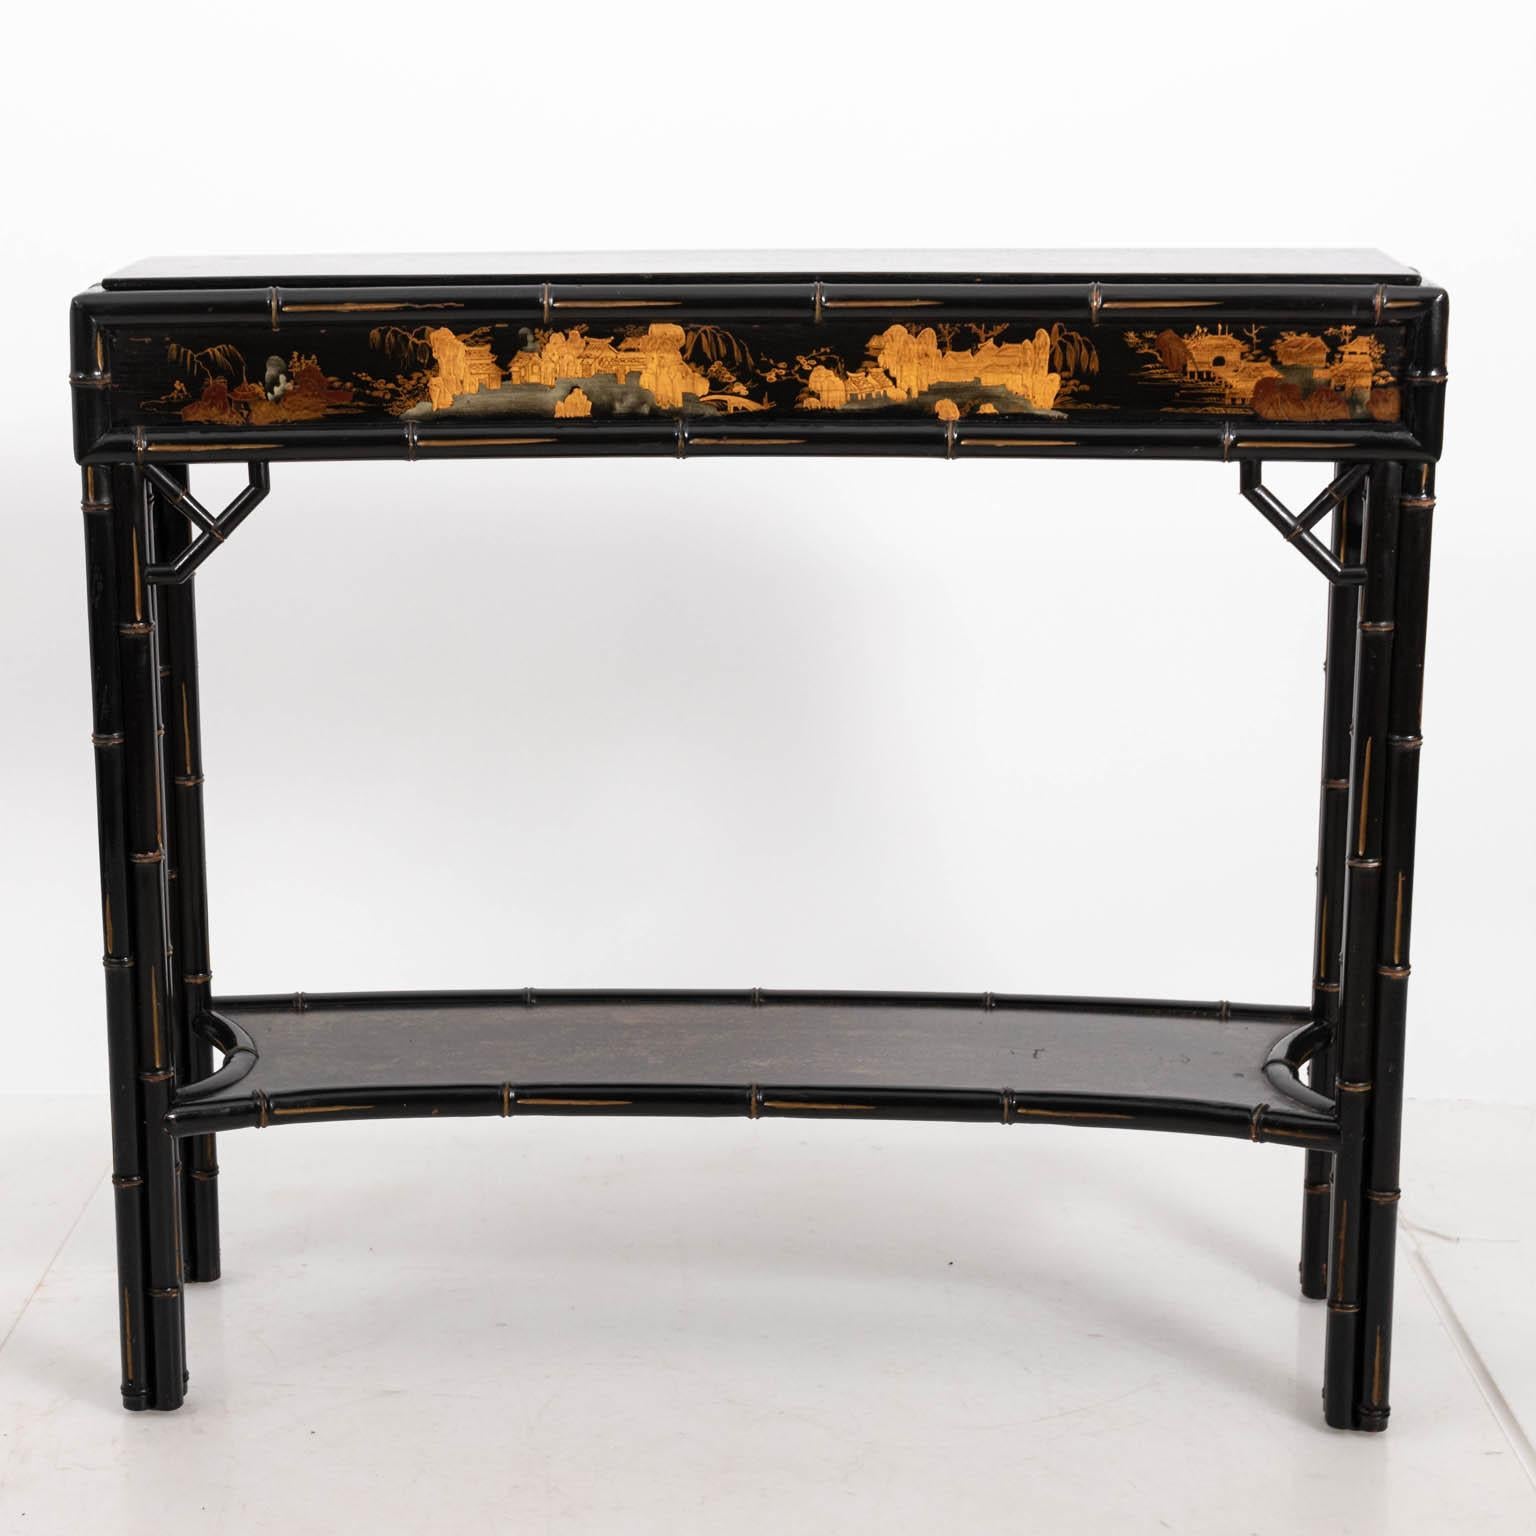 Black painted Hollywood Regency style two-tier console table with chinoiserie style faux bamboo detail and concave front, circa 1970-1980s. Please note of wear consistent with age.